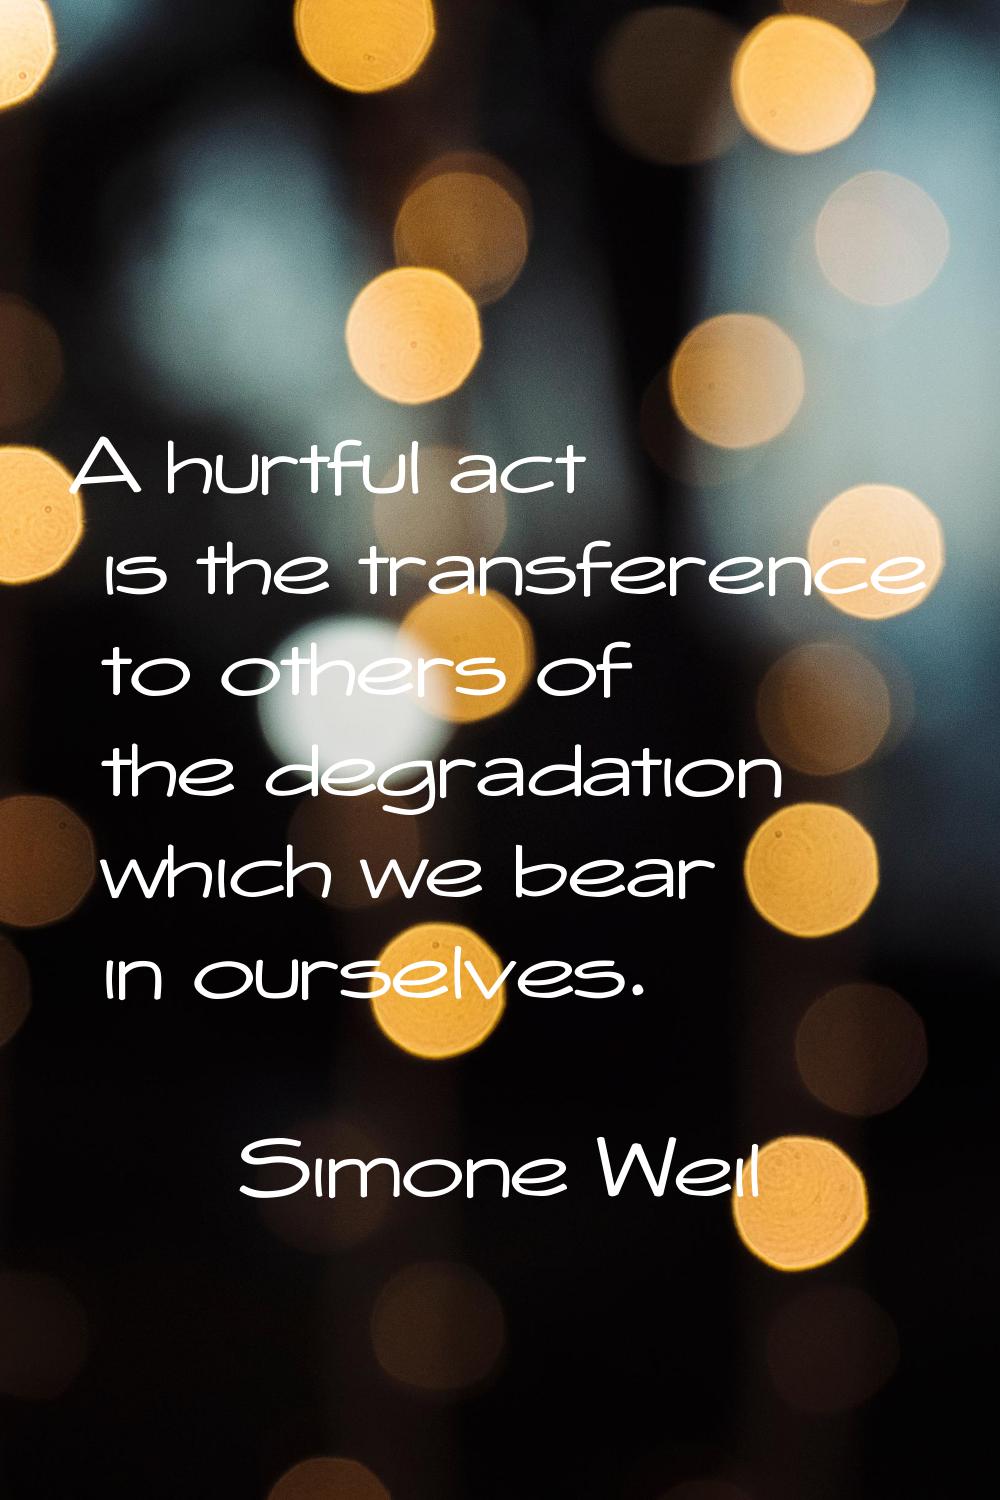 A hurtful act is the transference to others of the degradation which we bear in ourselves.